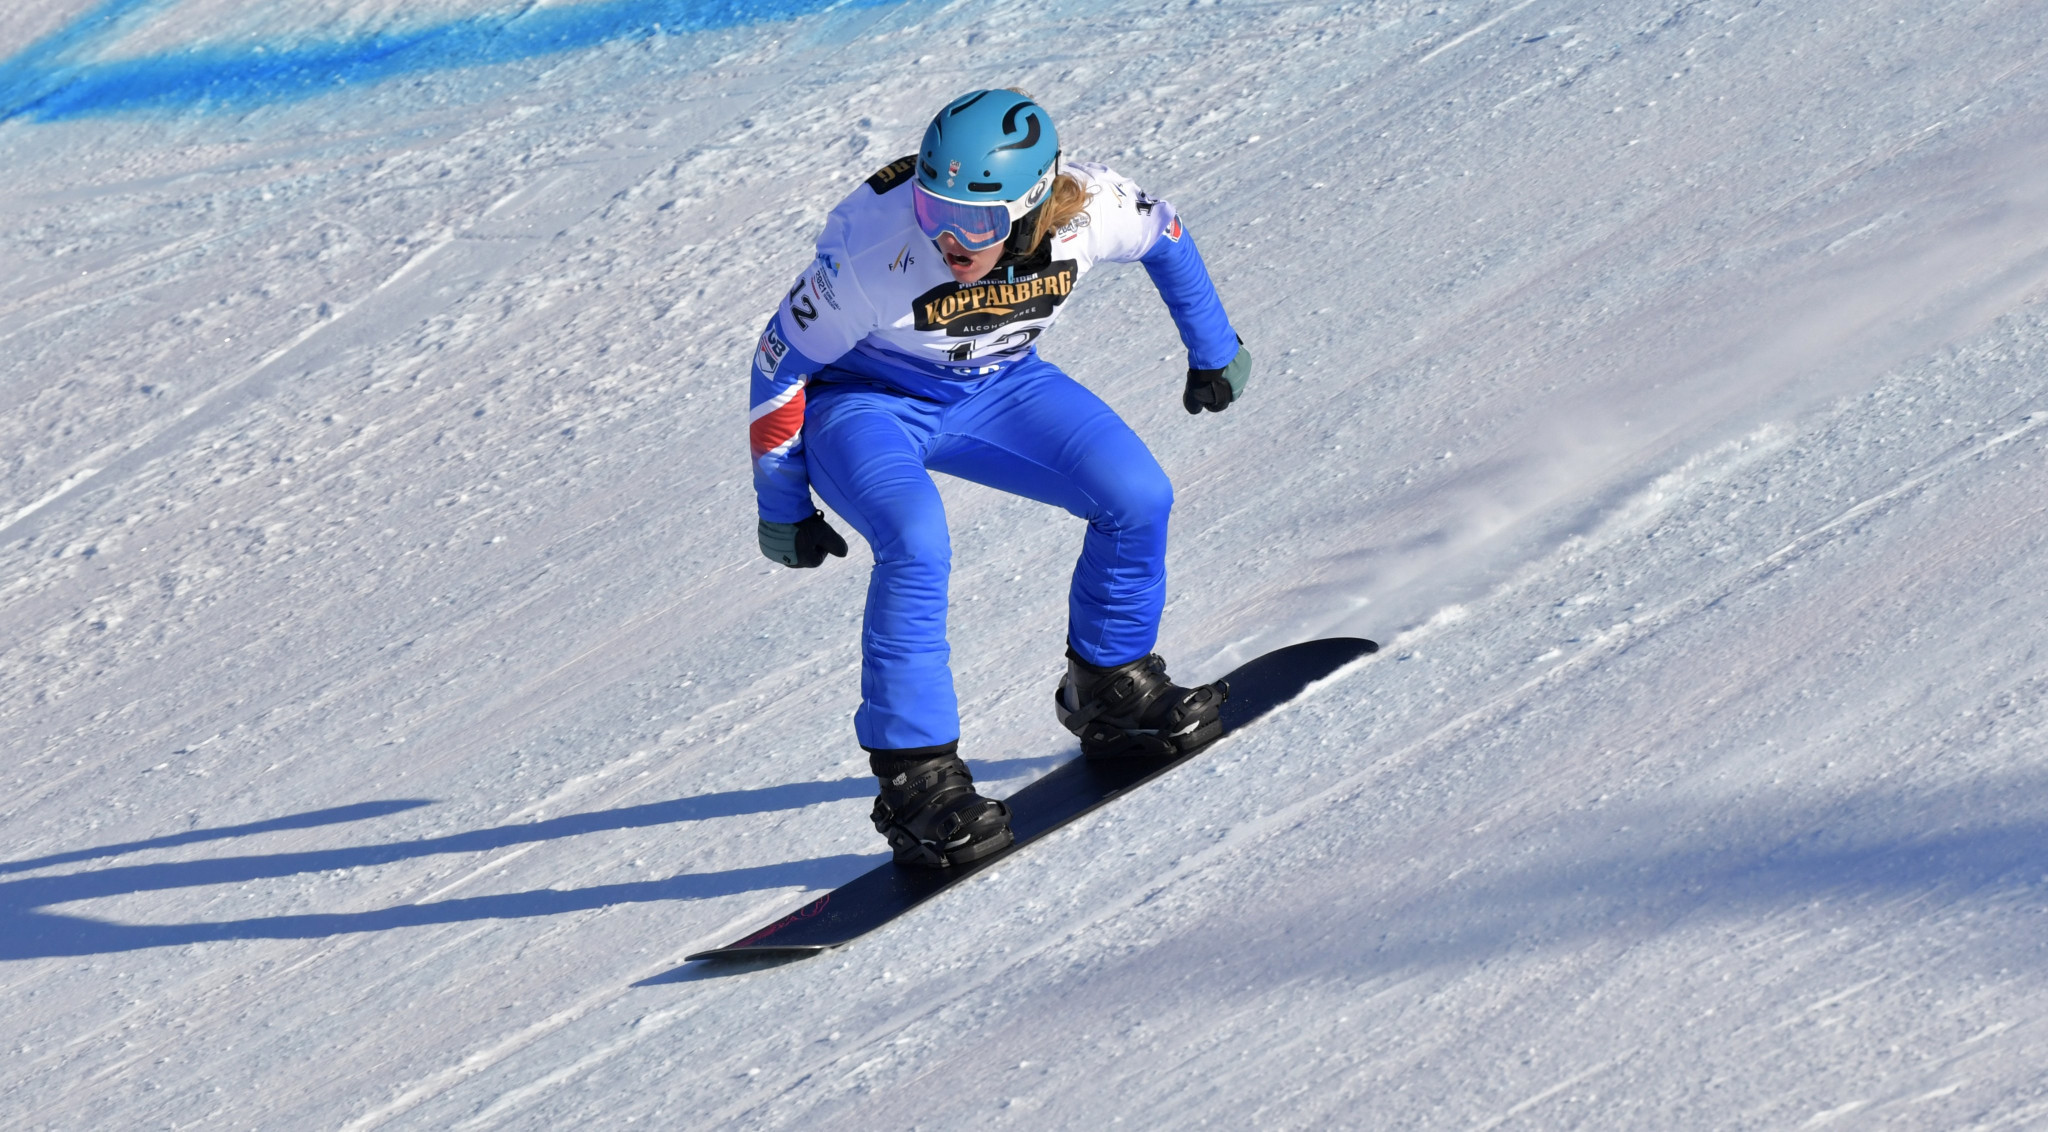 Britain's Charlotte Bankes topped Snowboard Cross World Cup qualifying in Krasnoyarsk ©Getty Images